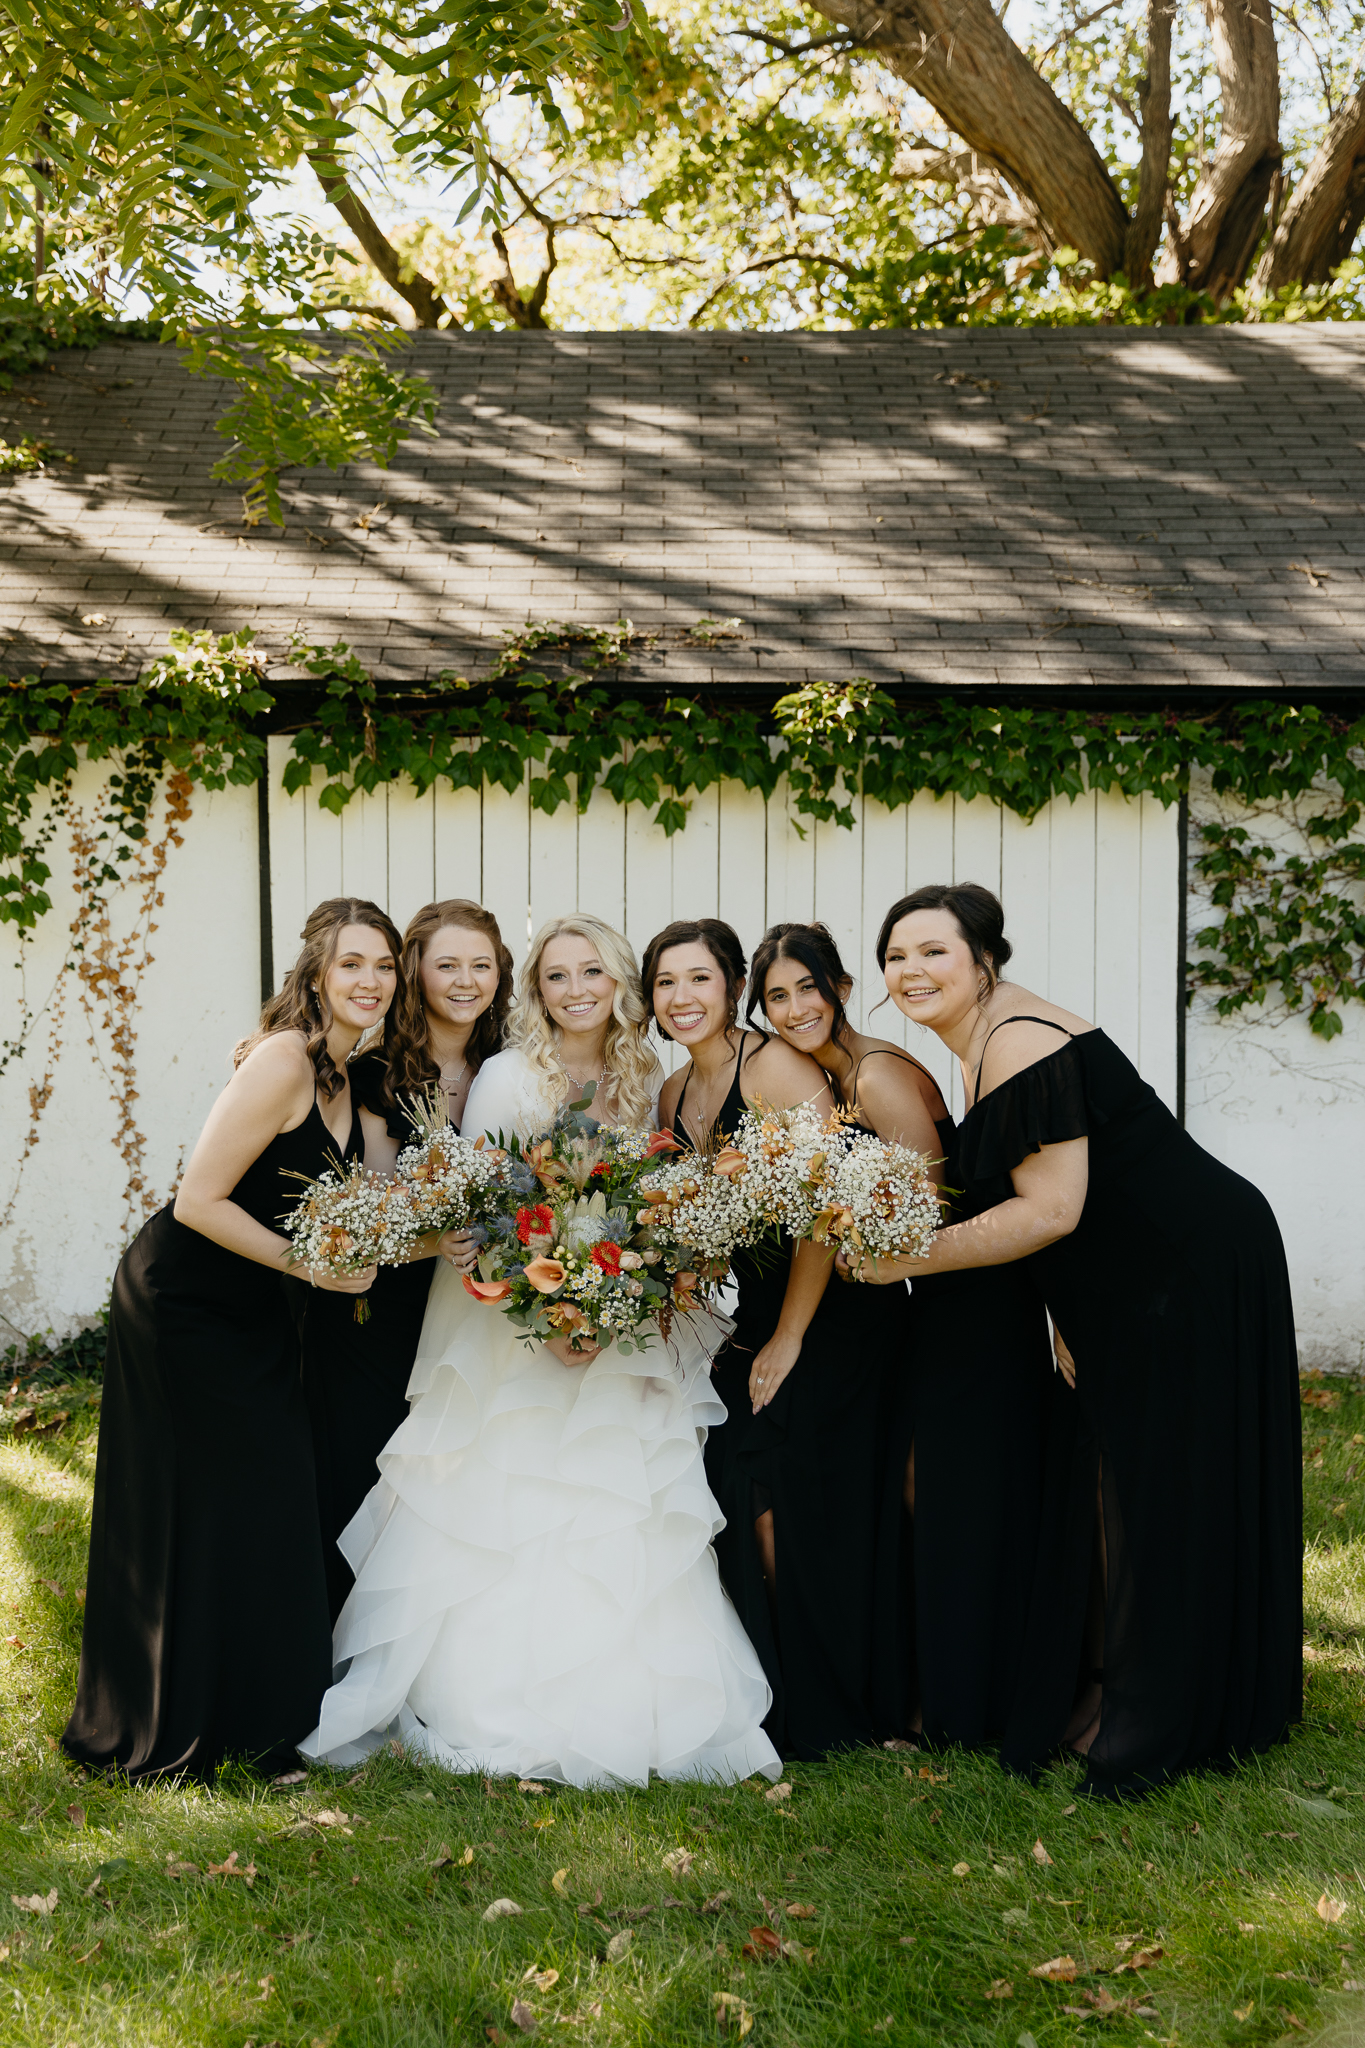 Bridesmaids and bride smile and laugh together with bouquets, standing in front of an ivy covered white barn at Northfork Farm